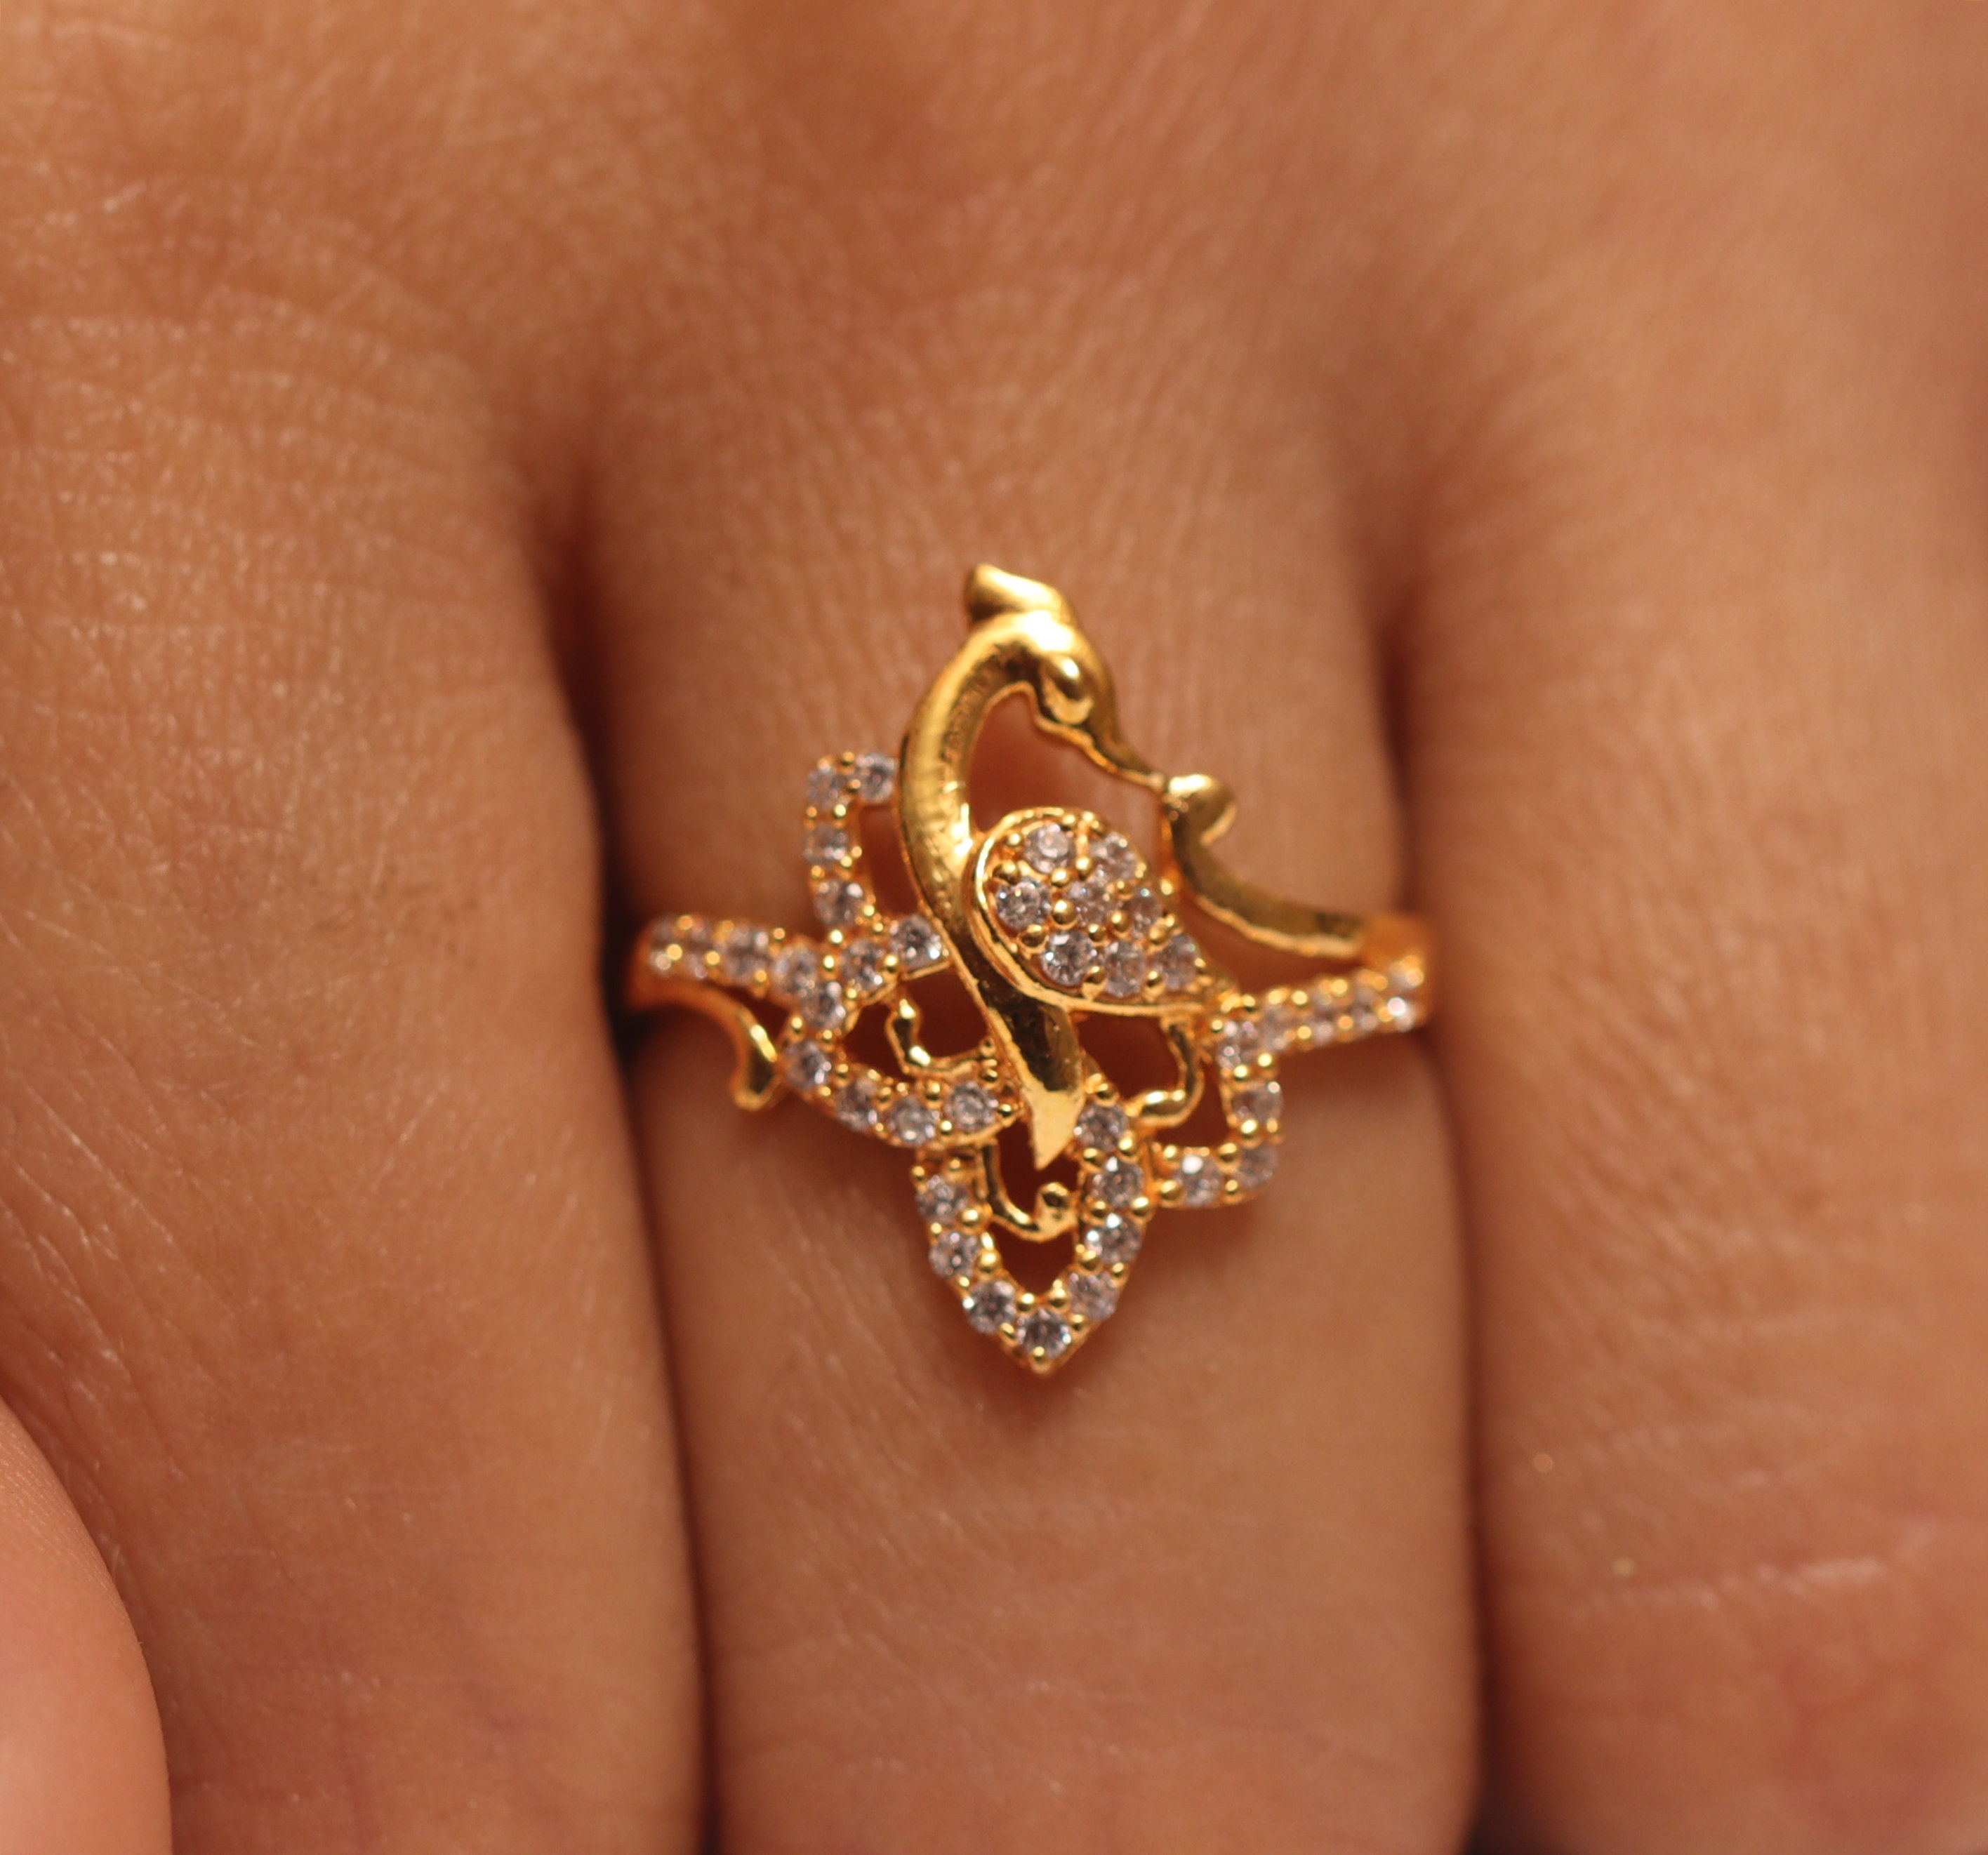 Women's Diamond Peacock Ring Gold Alloy Personality Ring Jewelry | Wish